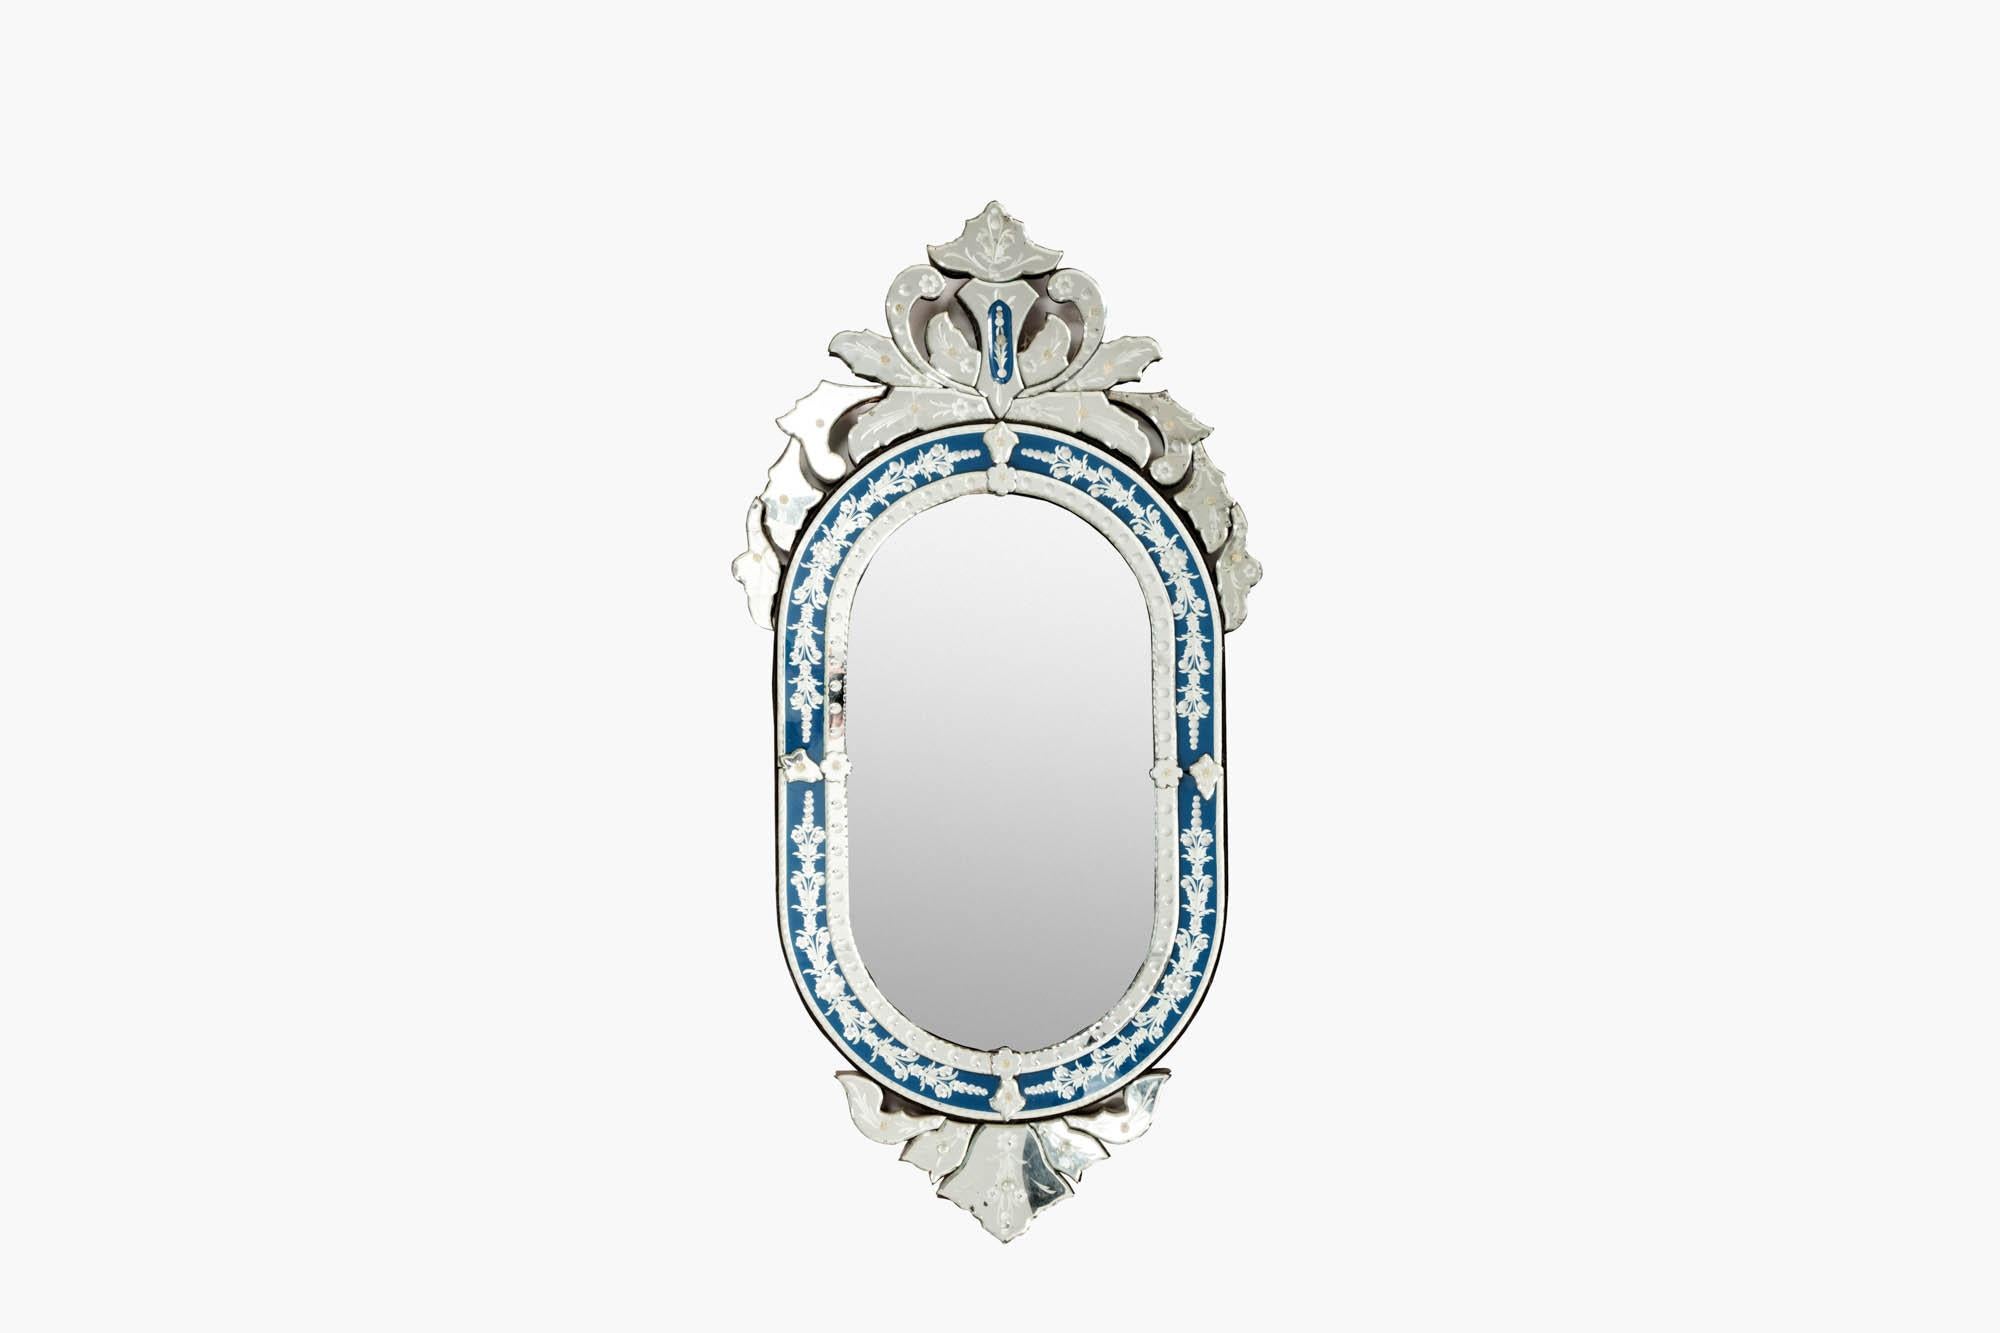 A highly decorative late 19th century Venetian glass mirror with reverse etched patterning and detailed hand painted enamelled blue glass panels. The central bevelled plate within the decorative frame beneath an exuberant scrolled crest with a